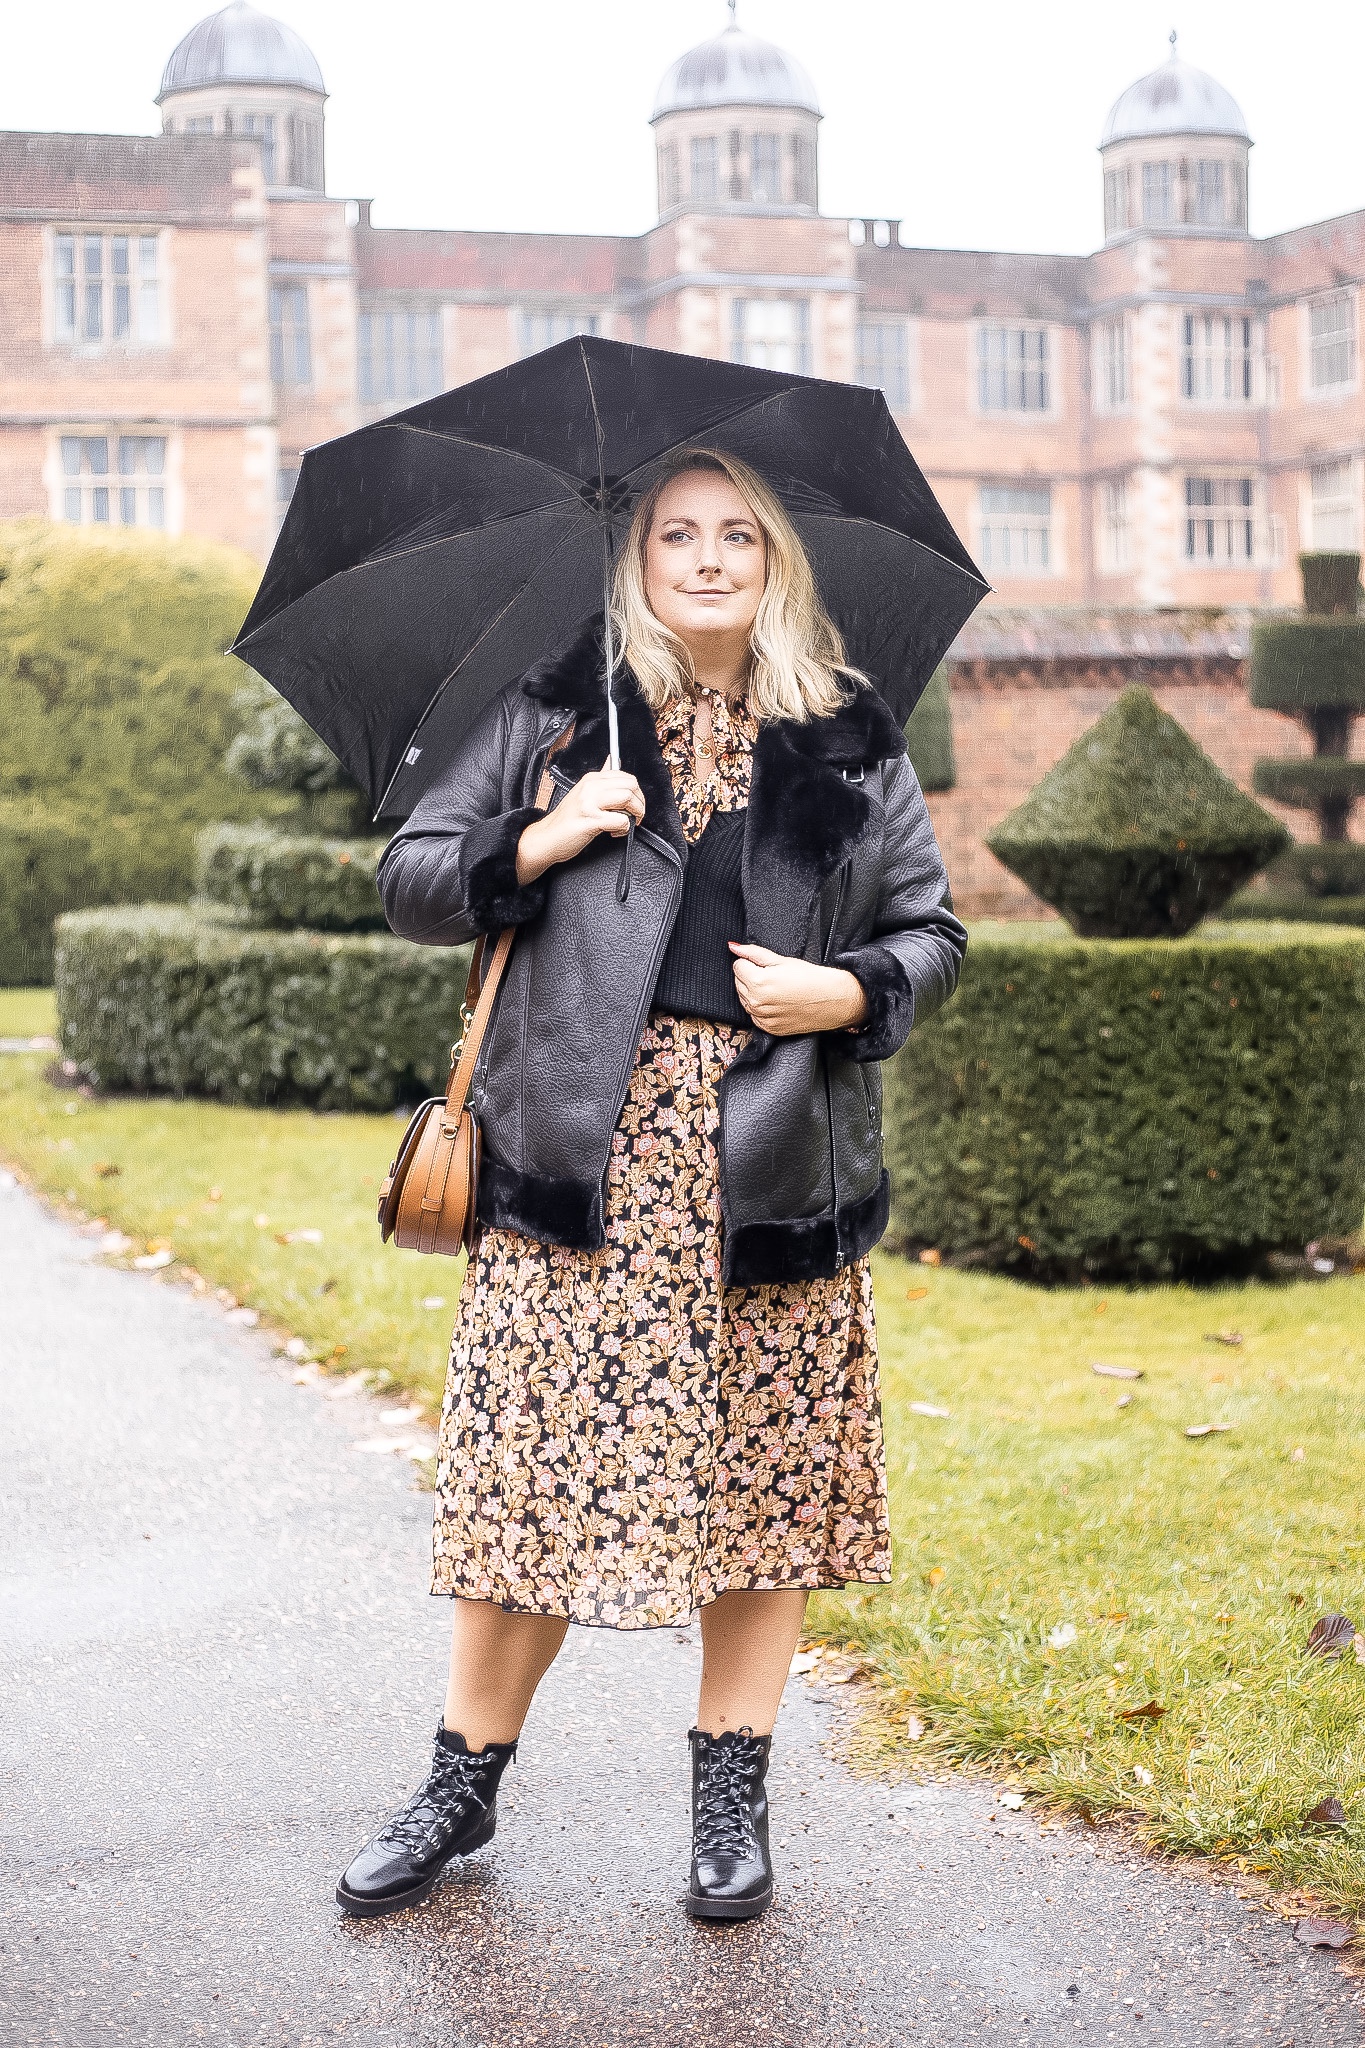 Lucy is stood in front of doddington hall, smiling holding an umbrella. She’s wearing a black jacket, dress and sweater vest